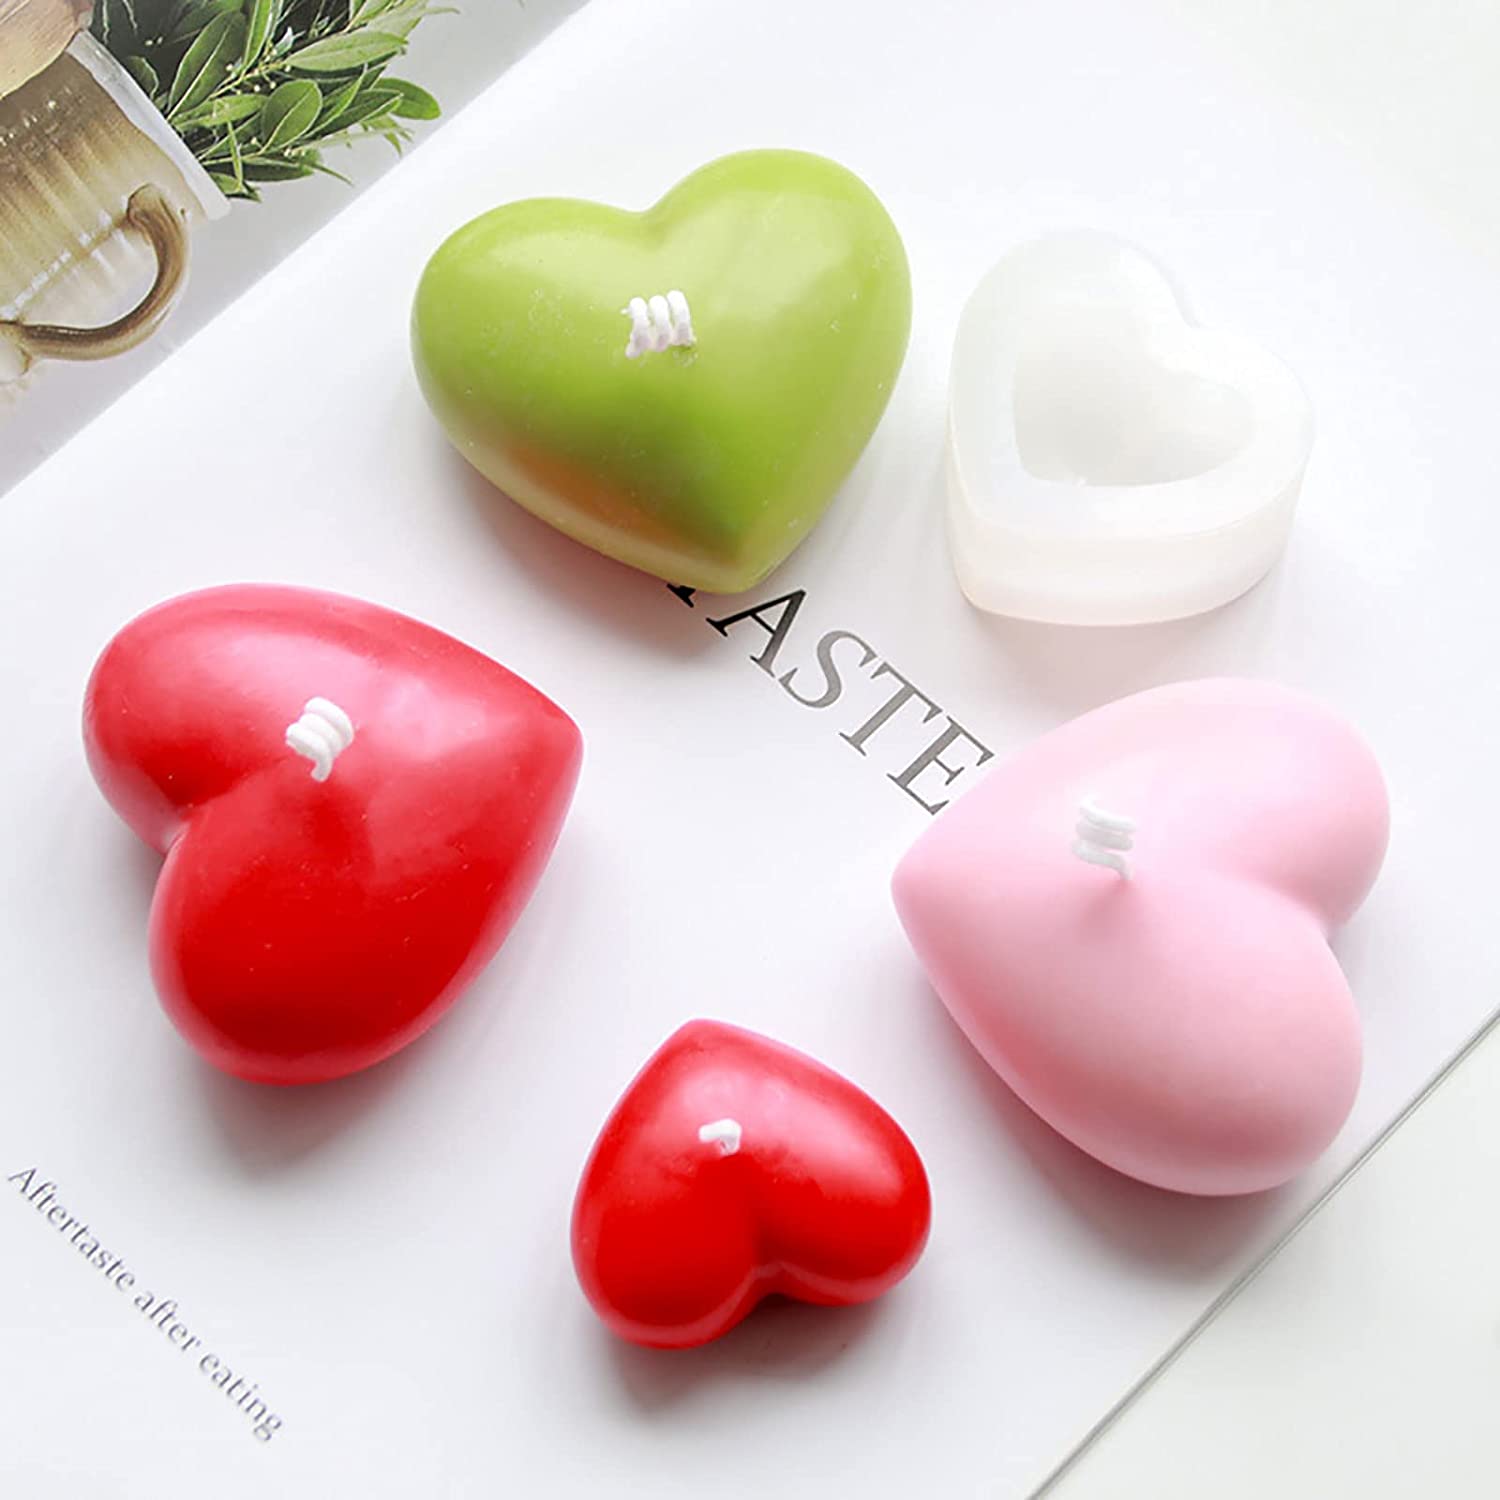 2-Pcs-Love-Heart-Shape-Silicone-Mold-Silicone-Moulds-3D-Heart-Soap-Mold-for-DIY-Handmade-Soap-Crafts-Silicone-Heart-Pend-B094XZ22RW-6.jpg